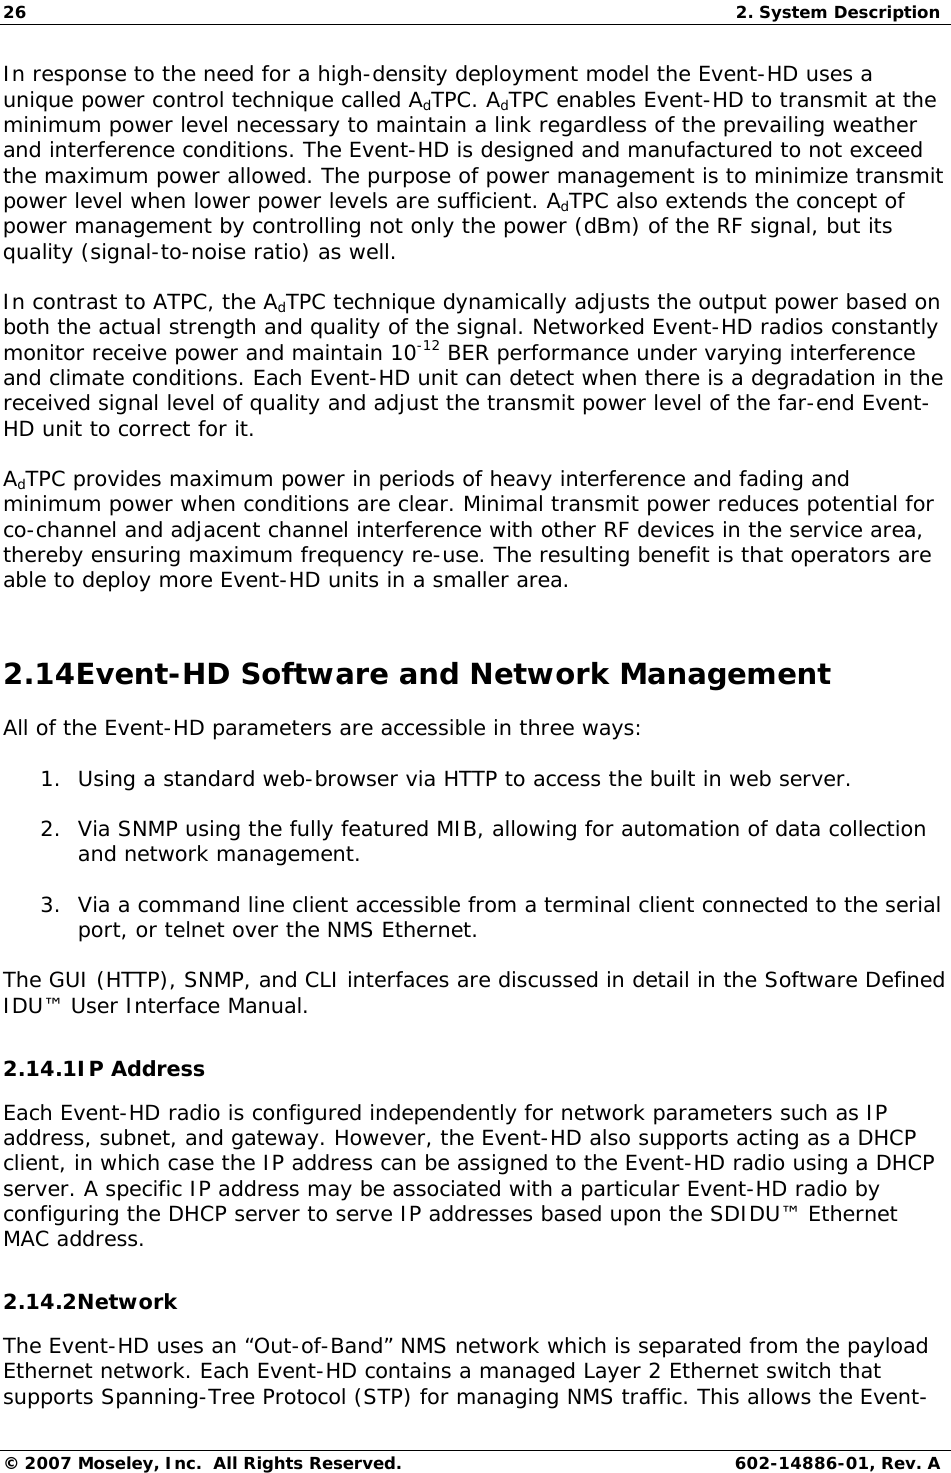 26  2. System Description © 2007 Moseley, Inc.  All Rights Reserved.  602-14886-01, Rev. A In response to the need for a high-density deployment model the Event-HD uses a unique power control technique called AdTPC. AdTPC enables Event-HD to transmit at the minimum power level necessary to maintain a link regardless of the prevailing weather and interference conditions. The Event-HD is designed and manufactured to not exceed the maximum power allowed. The purpose of power management is to minimize transmit power level when lower power levels are sufficient. AdTPC also extends the concept of power management by controlling not only the power (dBm) of the RF signal, but its quality (signal-to-noise ratio) as well. In contrast to ATPC, the AdTPC technique dynamically adjusts the output power based on both the actual strength and quality of the signal. Networked Event-HD radios constantly monitor receive power and maintain 10-12 BER performance under varying interference and climate conditions. Each Event-HD unit can detect when there is a degradation in the received signal level of quality and adjust the transmit power level of the far-end Event-HD unit to correct for it. AdTPC provides maximum power in periods of heavy interference and fading and minimum power when conditions are clear. Minimal transmit power reduces potential for co-channel and adjacent channel interference with other RF devices in the service area, thereby ensuring maximum frequency re-use. The resulting benefit is that operators are able to deploy more Event-HD units in a smaller area. 2.14Event-HD Software and Network Management All of the Event-HD parameters are accessible in three ways: 1. Using a standard web-browser via HTTP to access the built in web server. 2. Via SNMP using the fully featured MIB, allowing for automation of data collection and network management. 3. Via a command line client accessible from a terminal client connected to the serial port, or telnet over the NMS Ethernet. The GUI (HTTP), SNMP, and CLI interfaces are discussed in detail in the Software Defined IDU™ User Interface Manual. 2.14.1IP Address Each Event-HD radio is configured independently for network parameters such as IP address, subnet, and gateway. However, the Event-HD also supports acting as a DHCP client, in which case the IP address can be assigned to the Event-HD radio using a DHCP server. A specific IP address may be associated with a particular Event-HD radio by configuring the DHCP server to serve IP addresses based upon the SDIDU™ Ethernet MAC address. 2.14.2Network The Event-HD uses an “Out-of-Band” NMS network which is separated from the payload Ethernet network. Each Event-HD contains a managed Layer 2 Ethernet switch that supports Spanning-Tree Protocol (STP) for managing NMS traffic. This allows the Event-